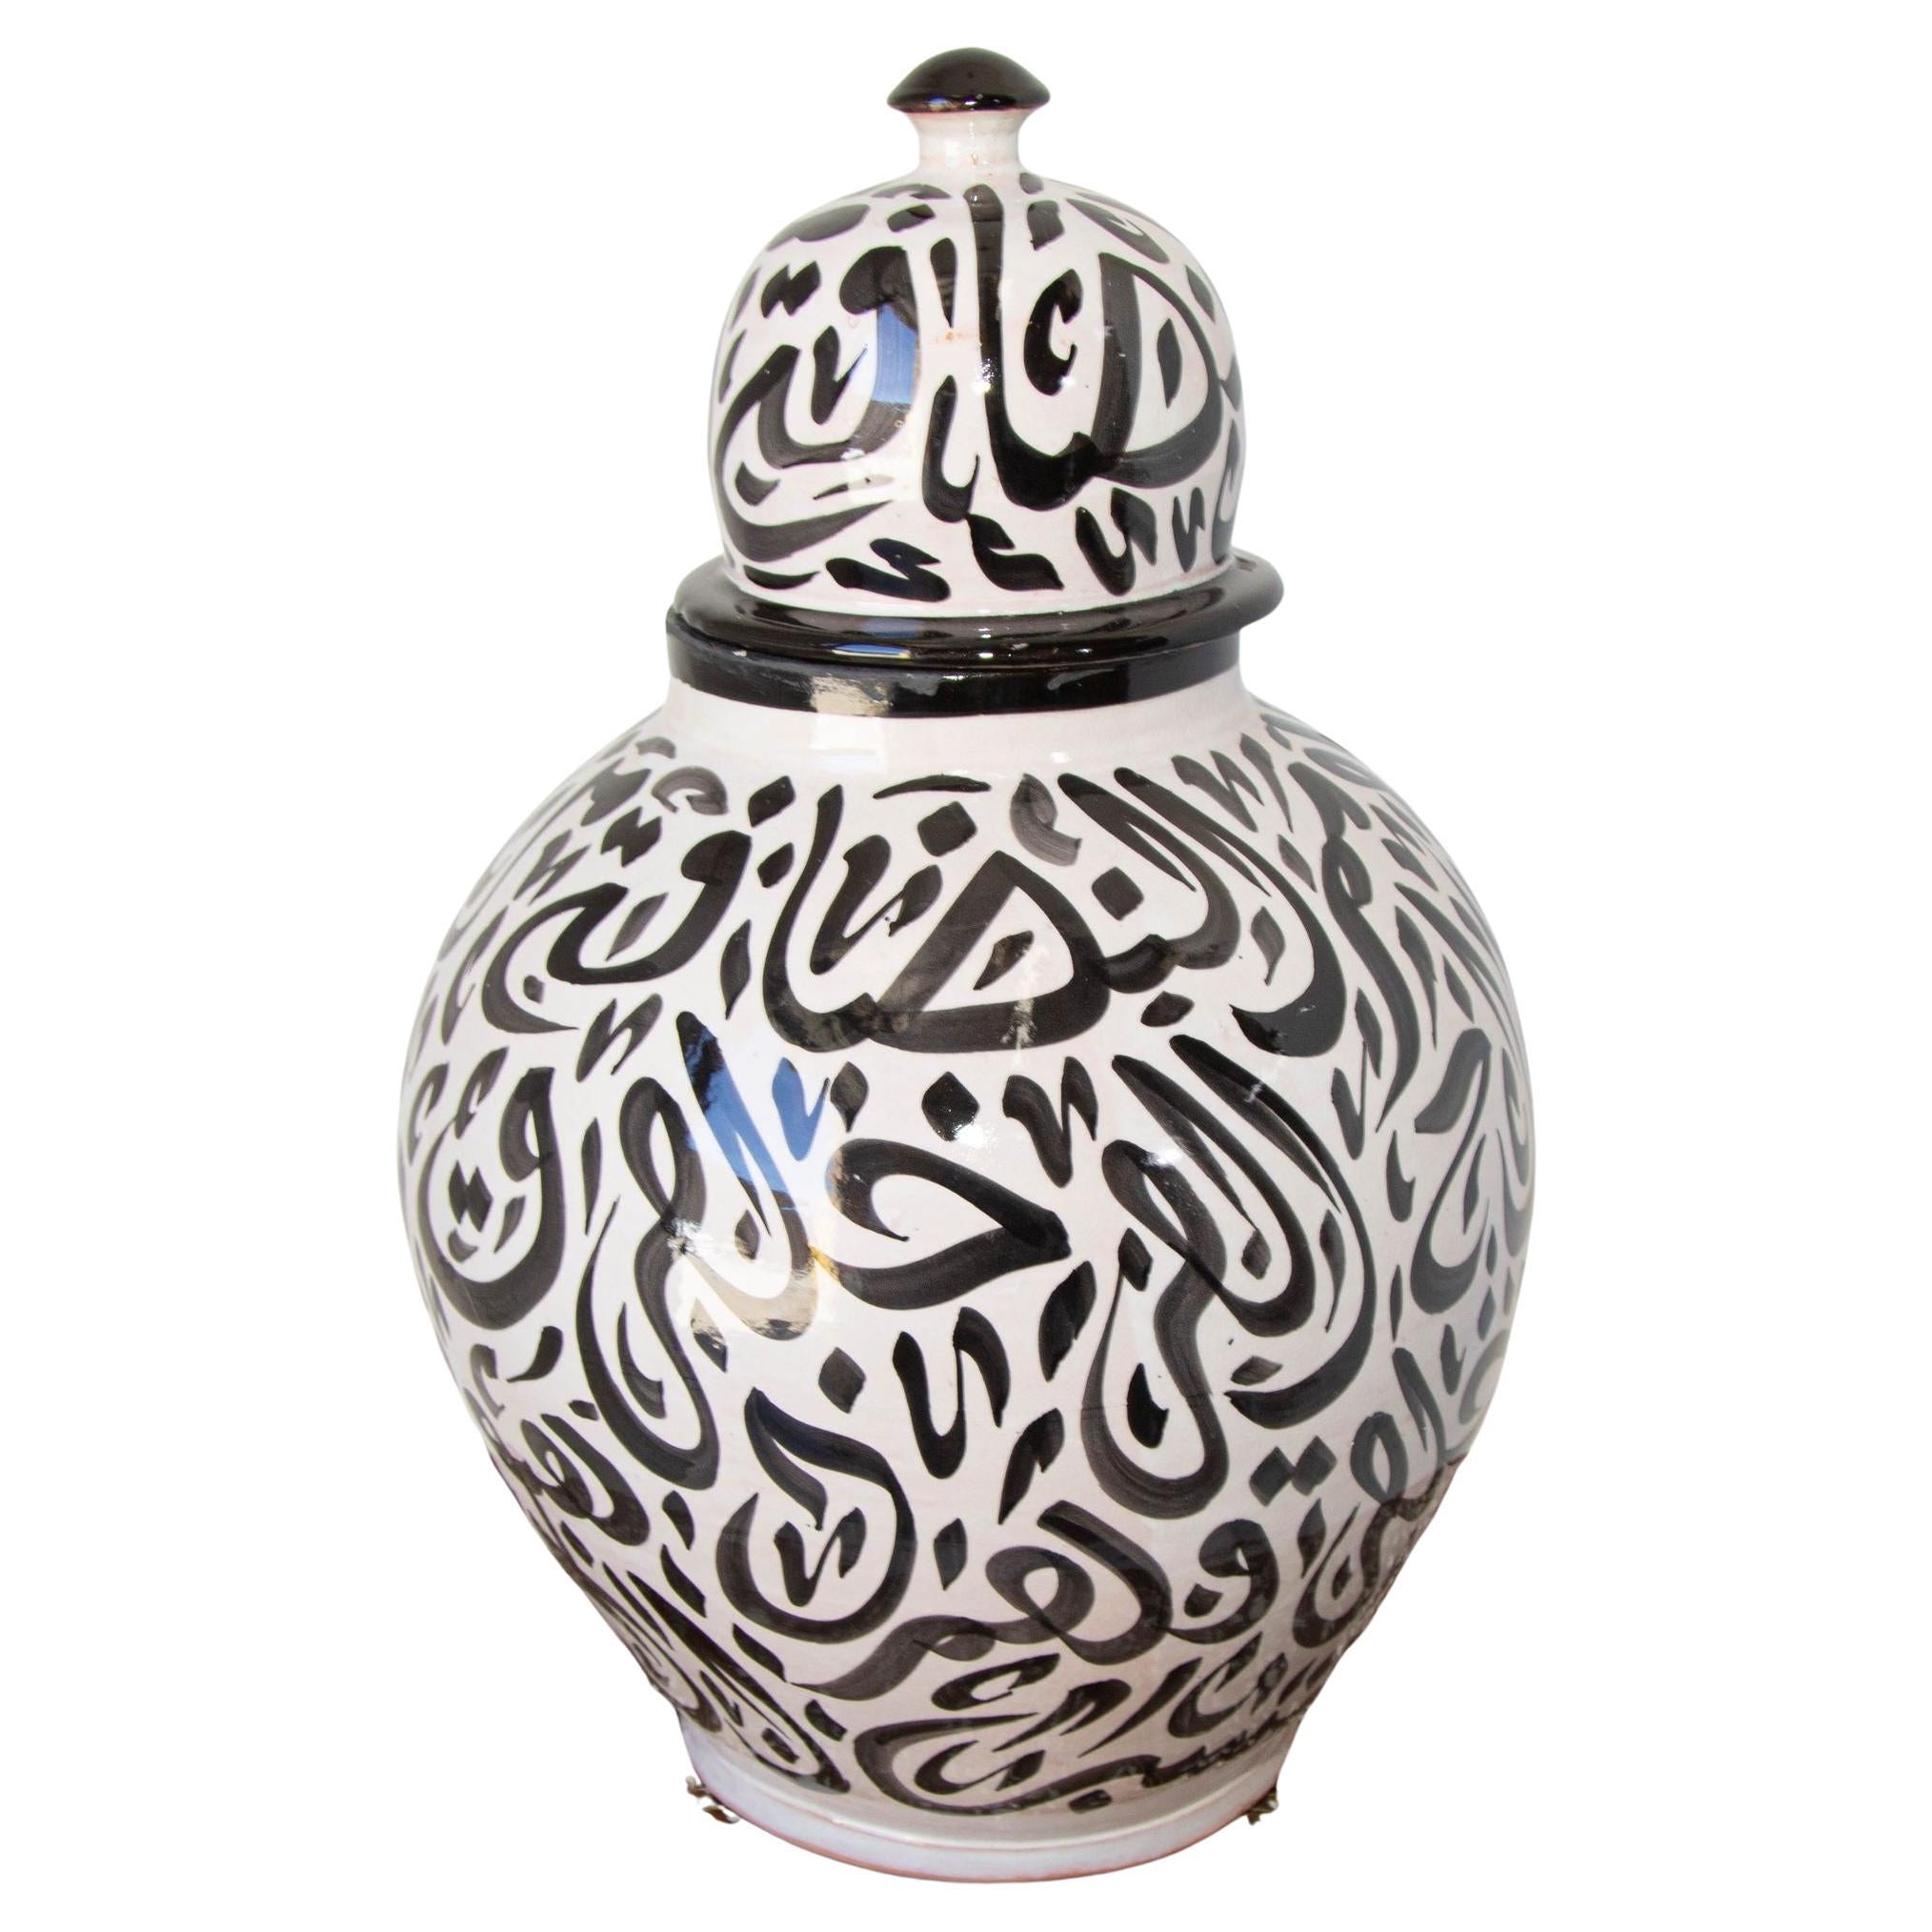 Moroccan Ceramic Lidded Urn with Arabic Calligraphy Black Writing, Fez For Sale